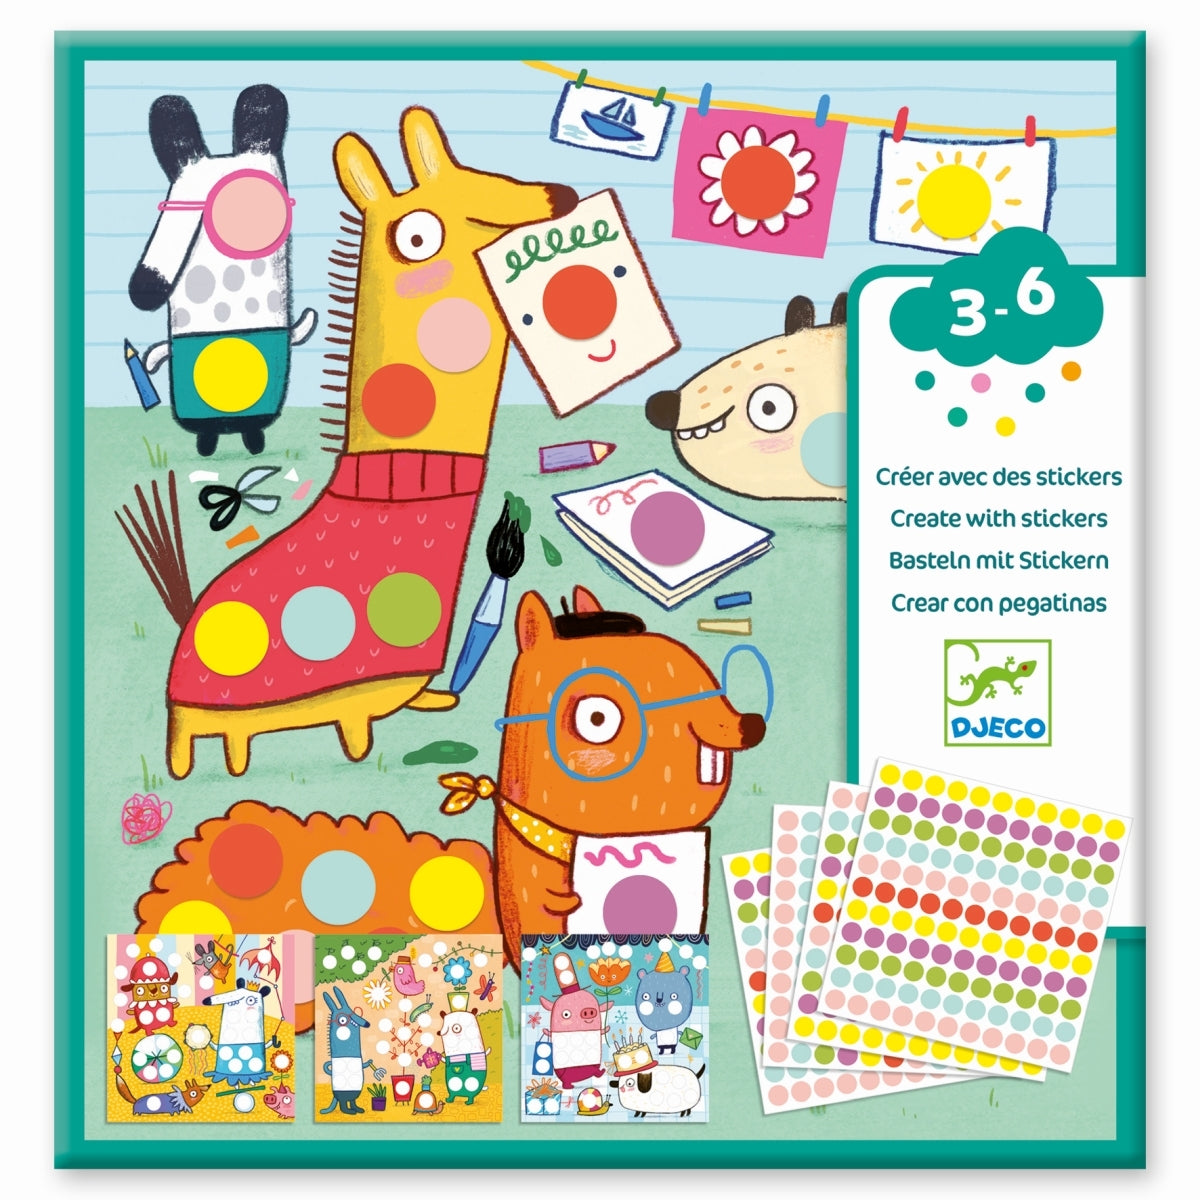 Create with stickers - coloured dots